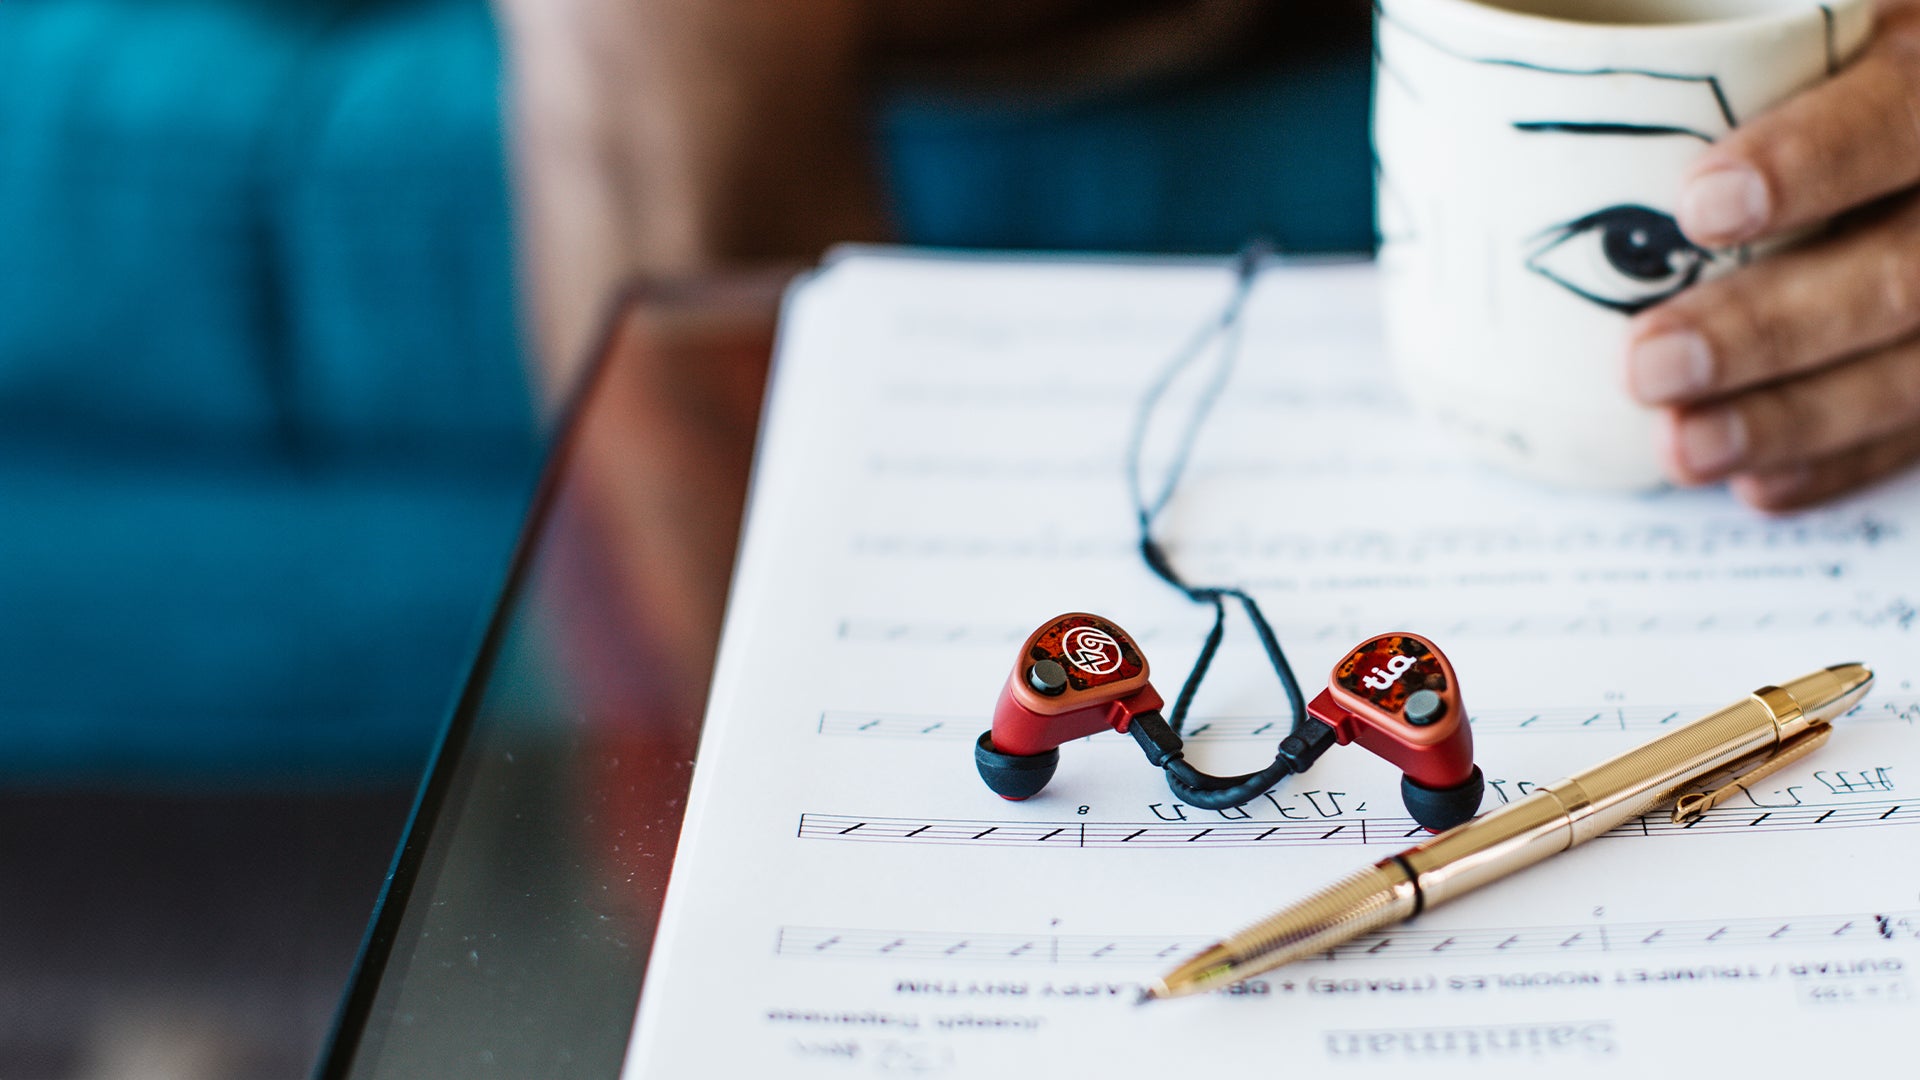 64audio iems on top of sheet music with gold pen